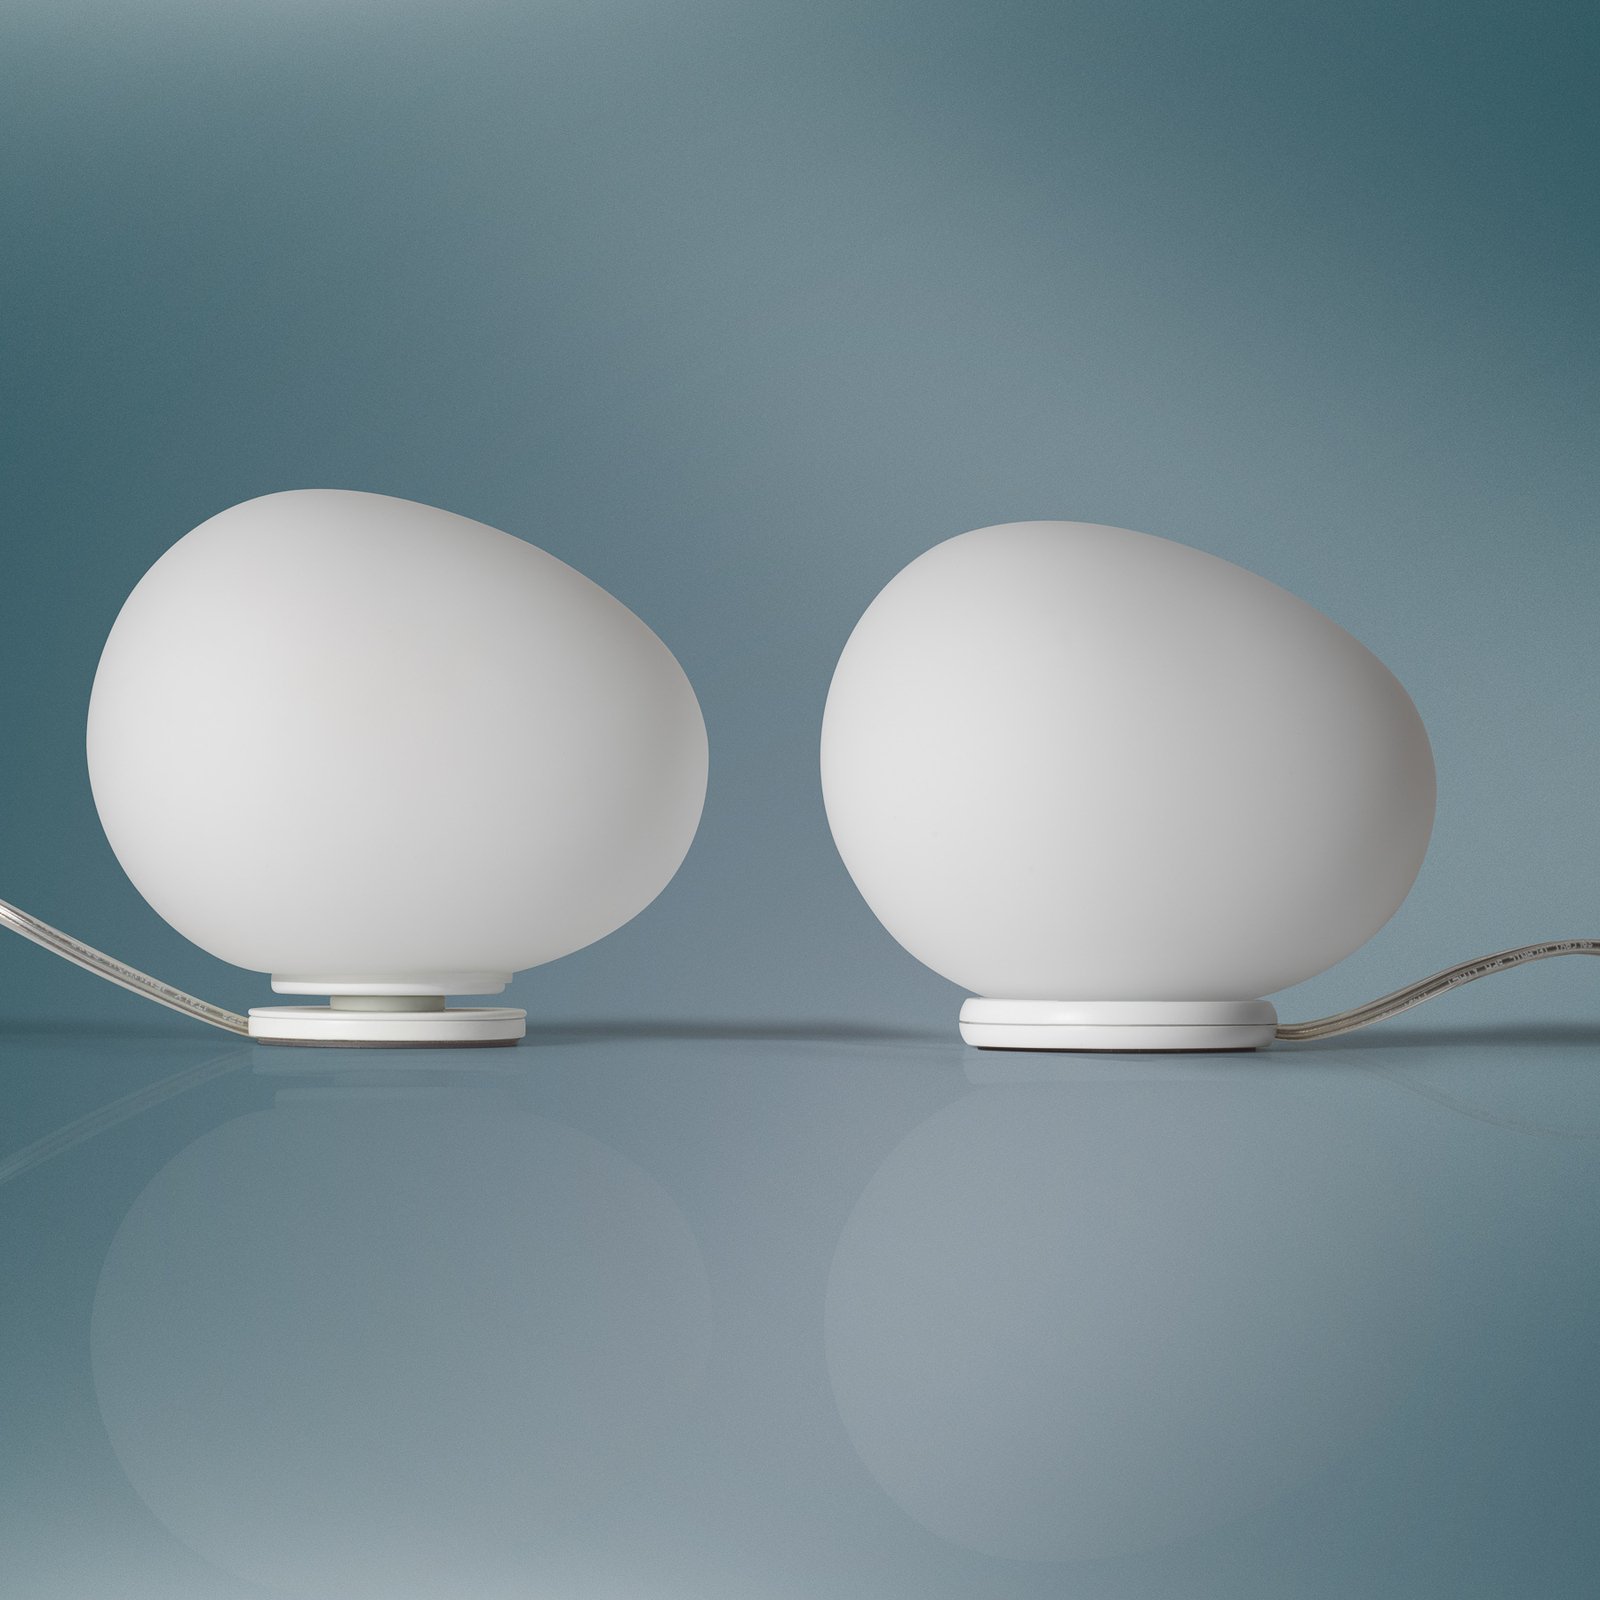 Foscarini Gregg piccola table lamp with dimmer